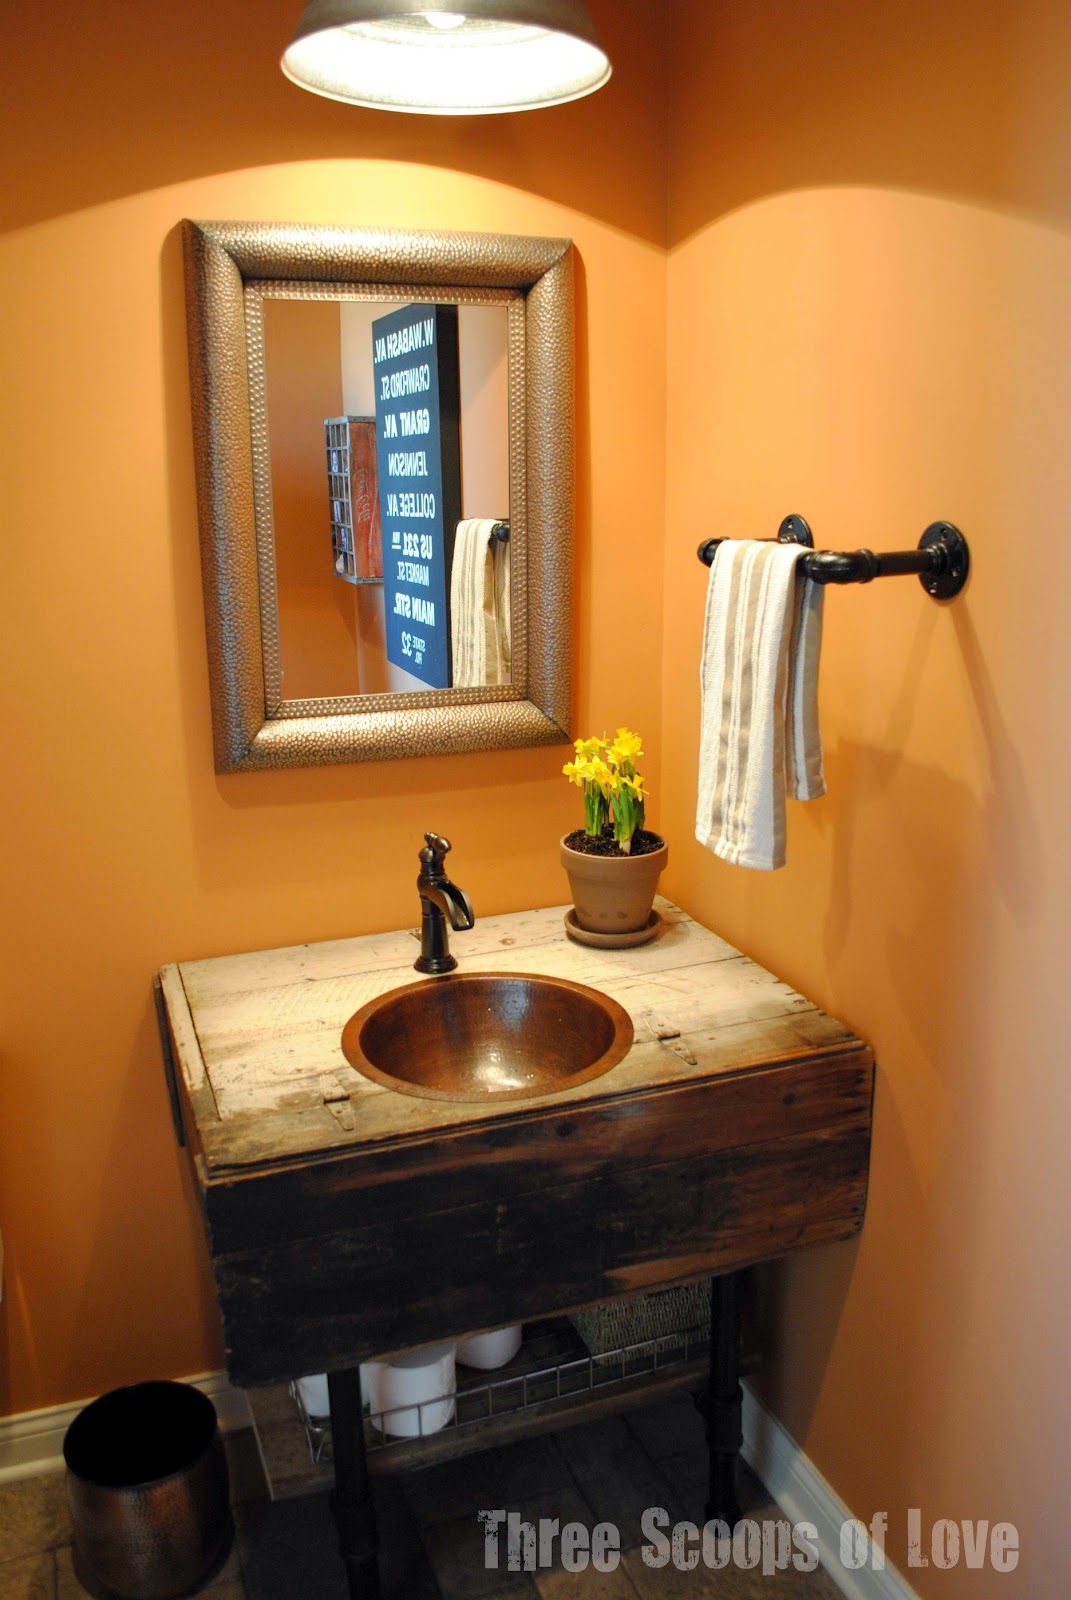 15 Stunning DIY Bathroom Vanity Projects That You Too Can Make